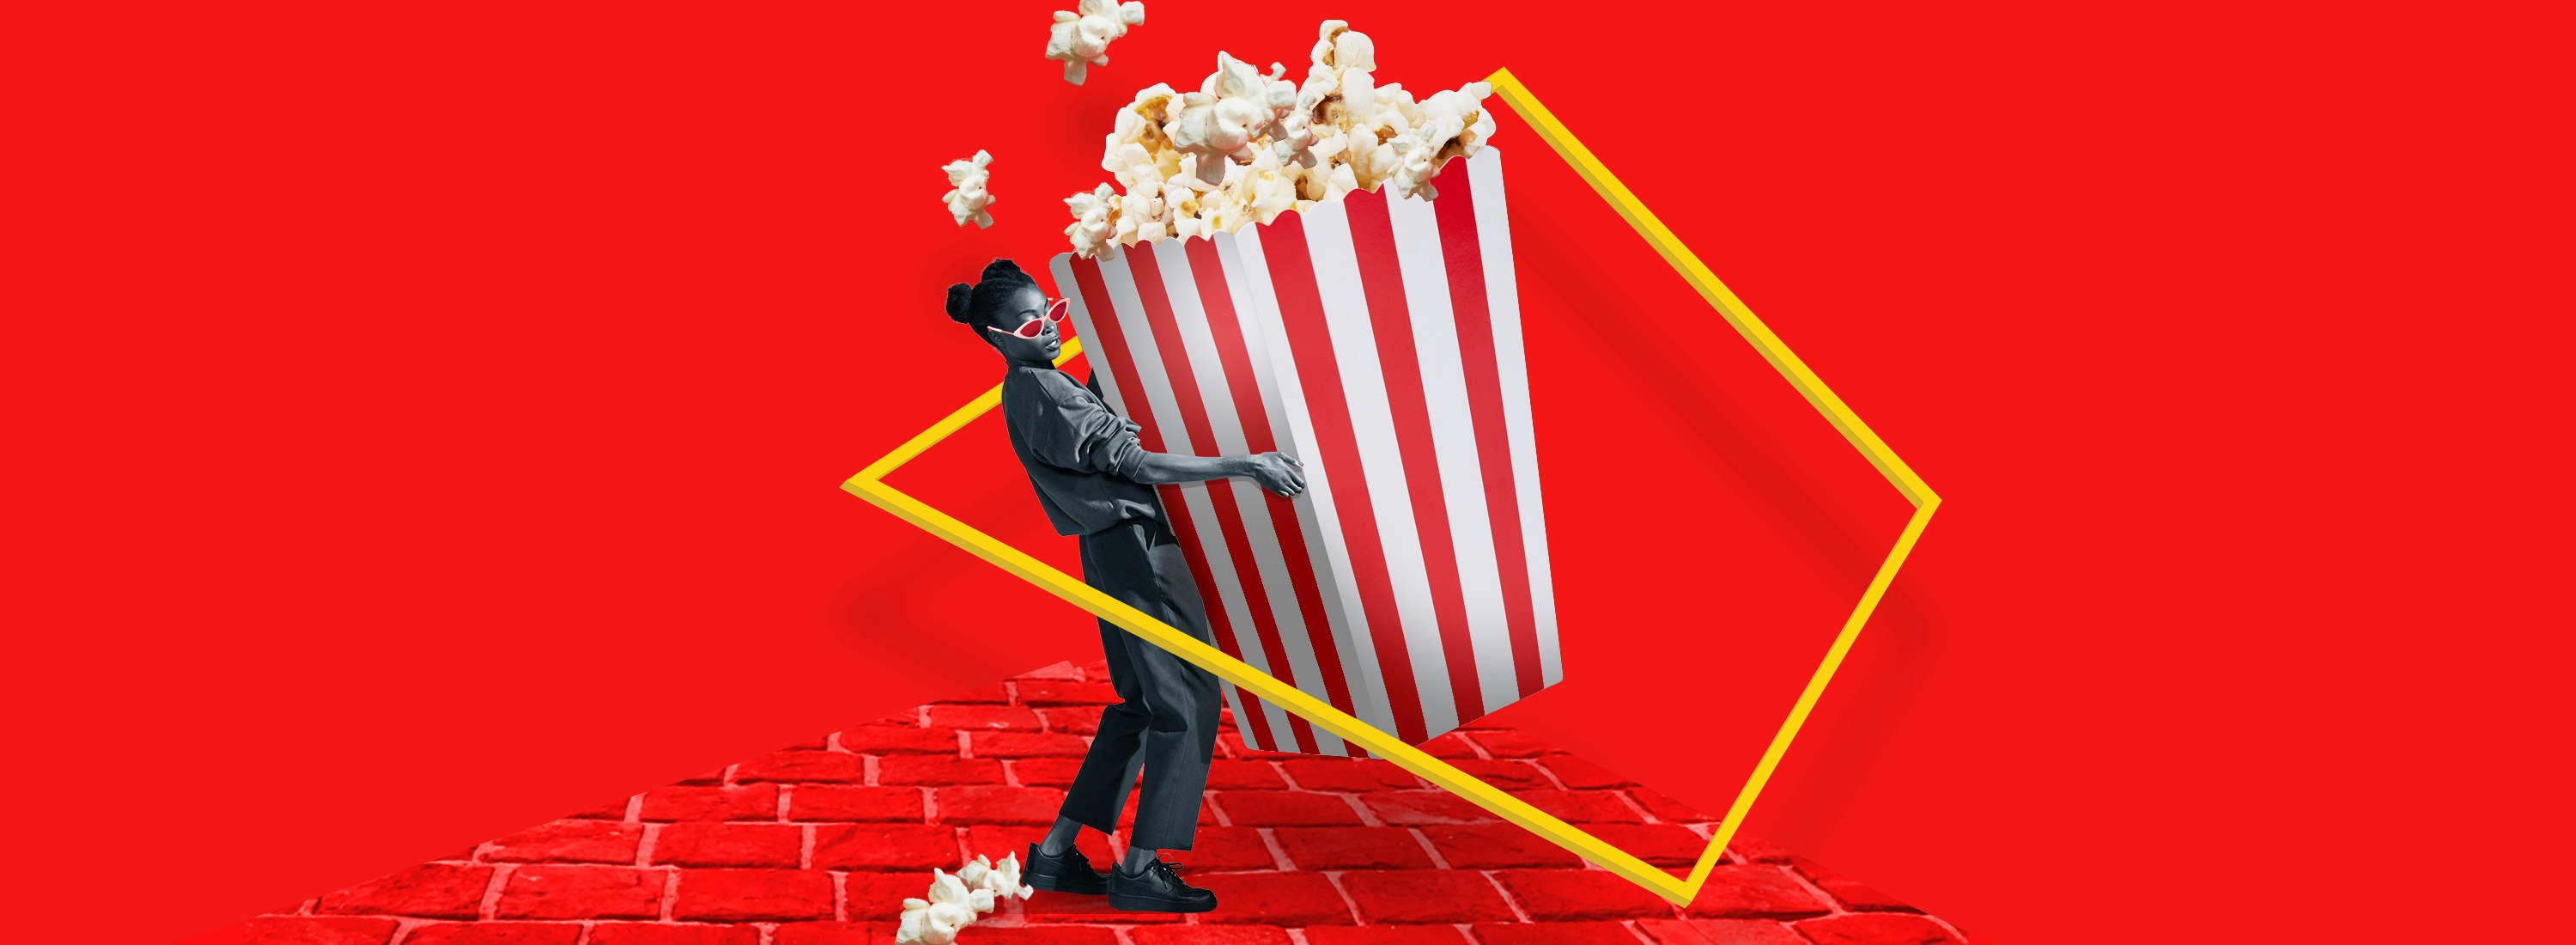 A composite image of a woman holding onto a container of popcorn that is taller than her on a red background